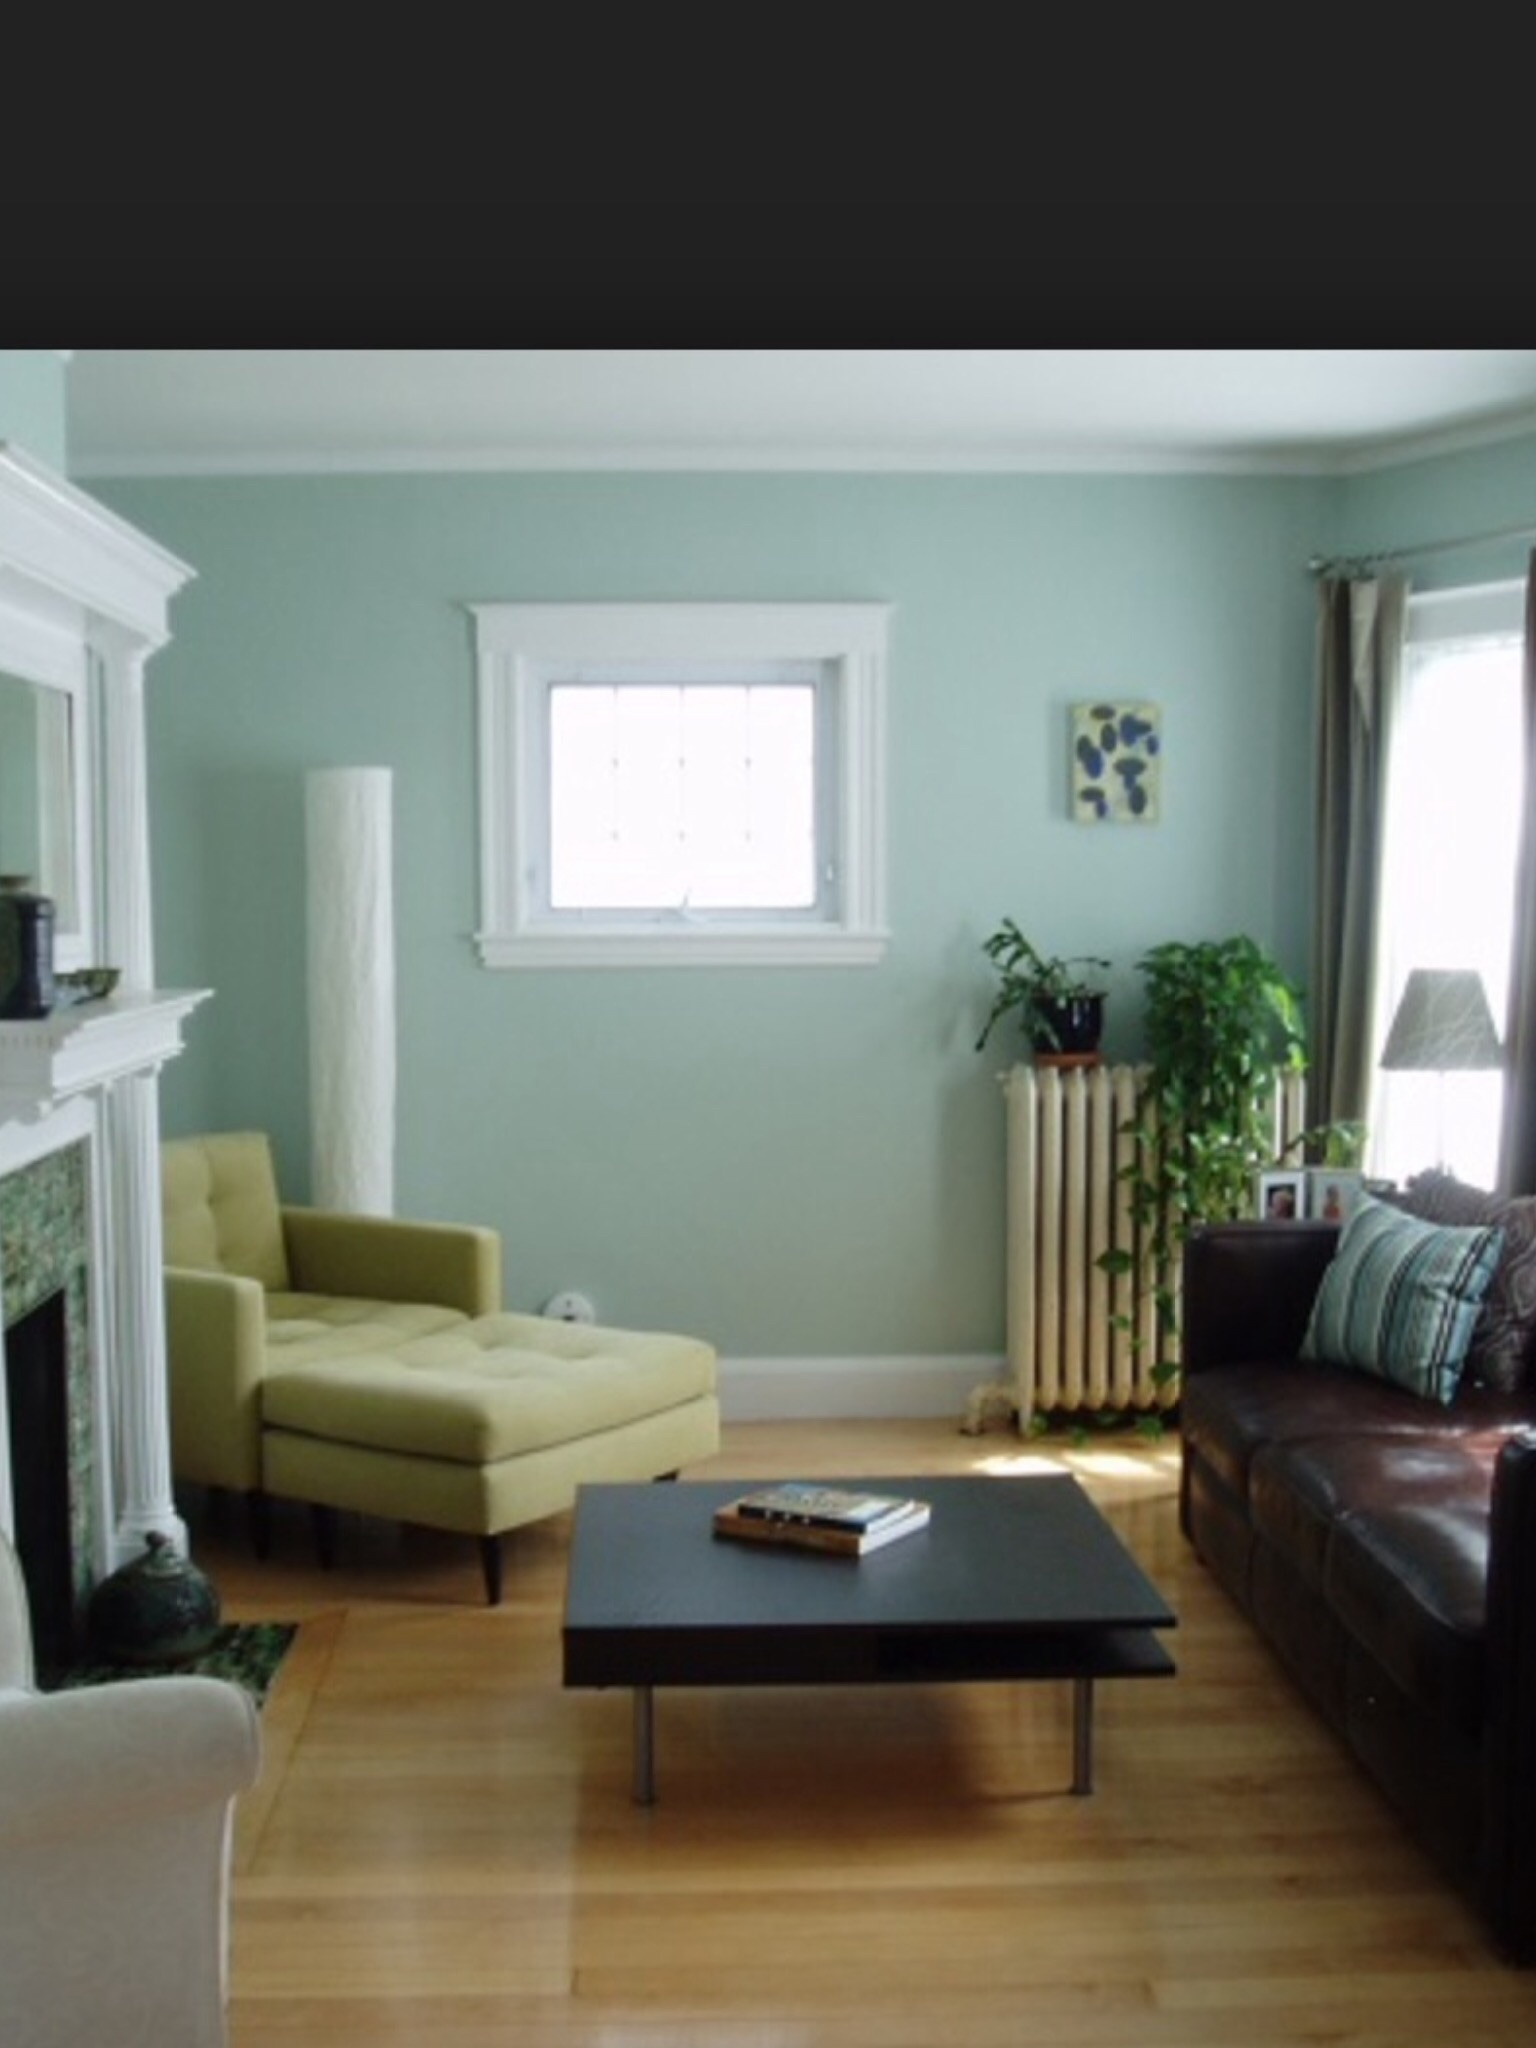 Green Paint For Living Room
 Blue Blue green paint for living room The colour I want